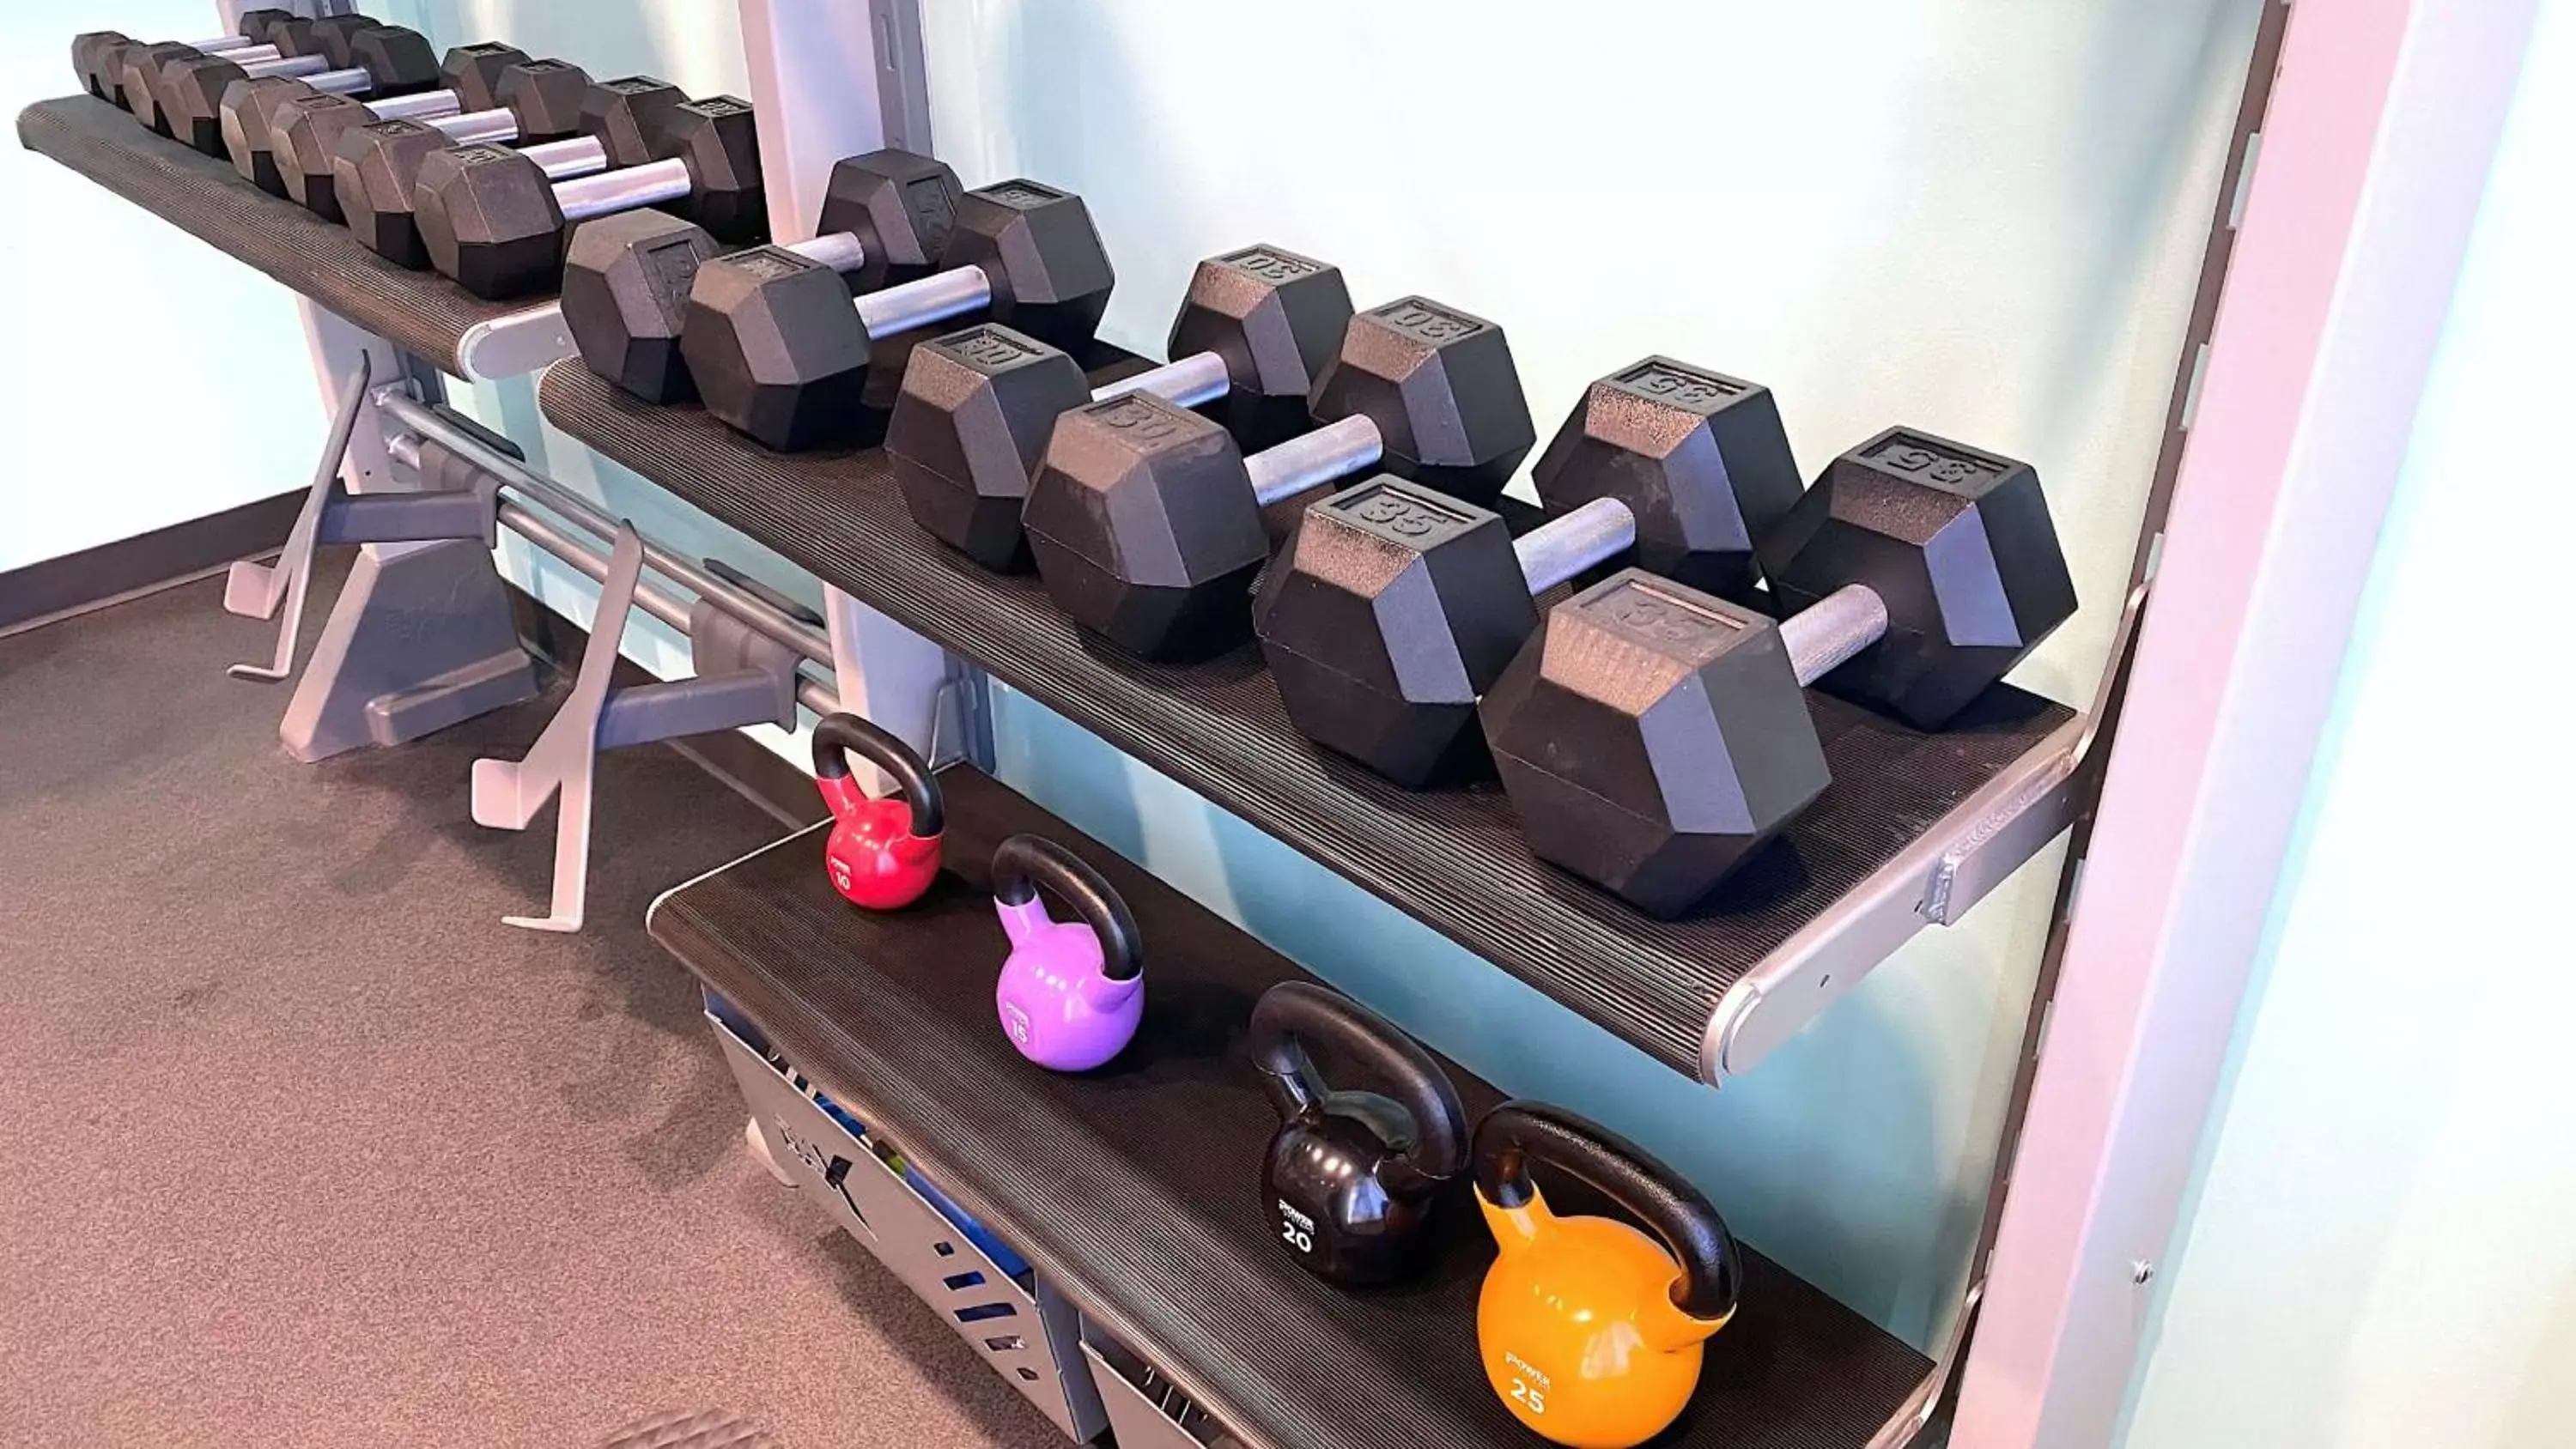 Fitness centre/facilities in Tru By Hilton Baltimore Harbor East